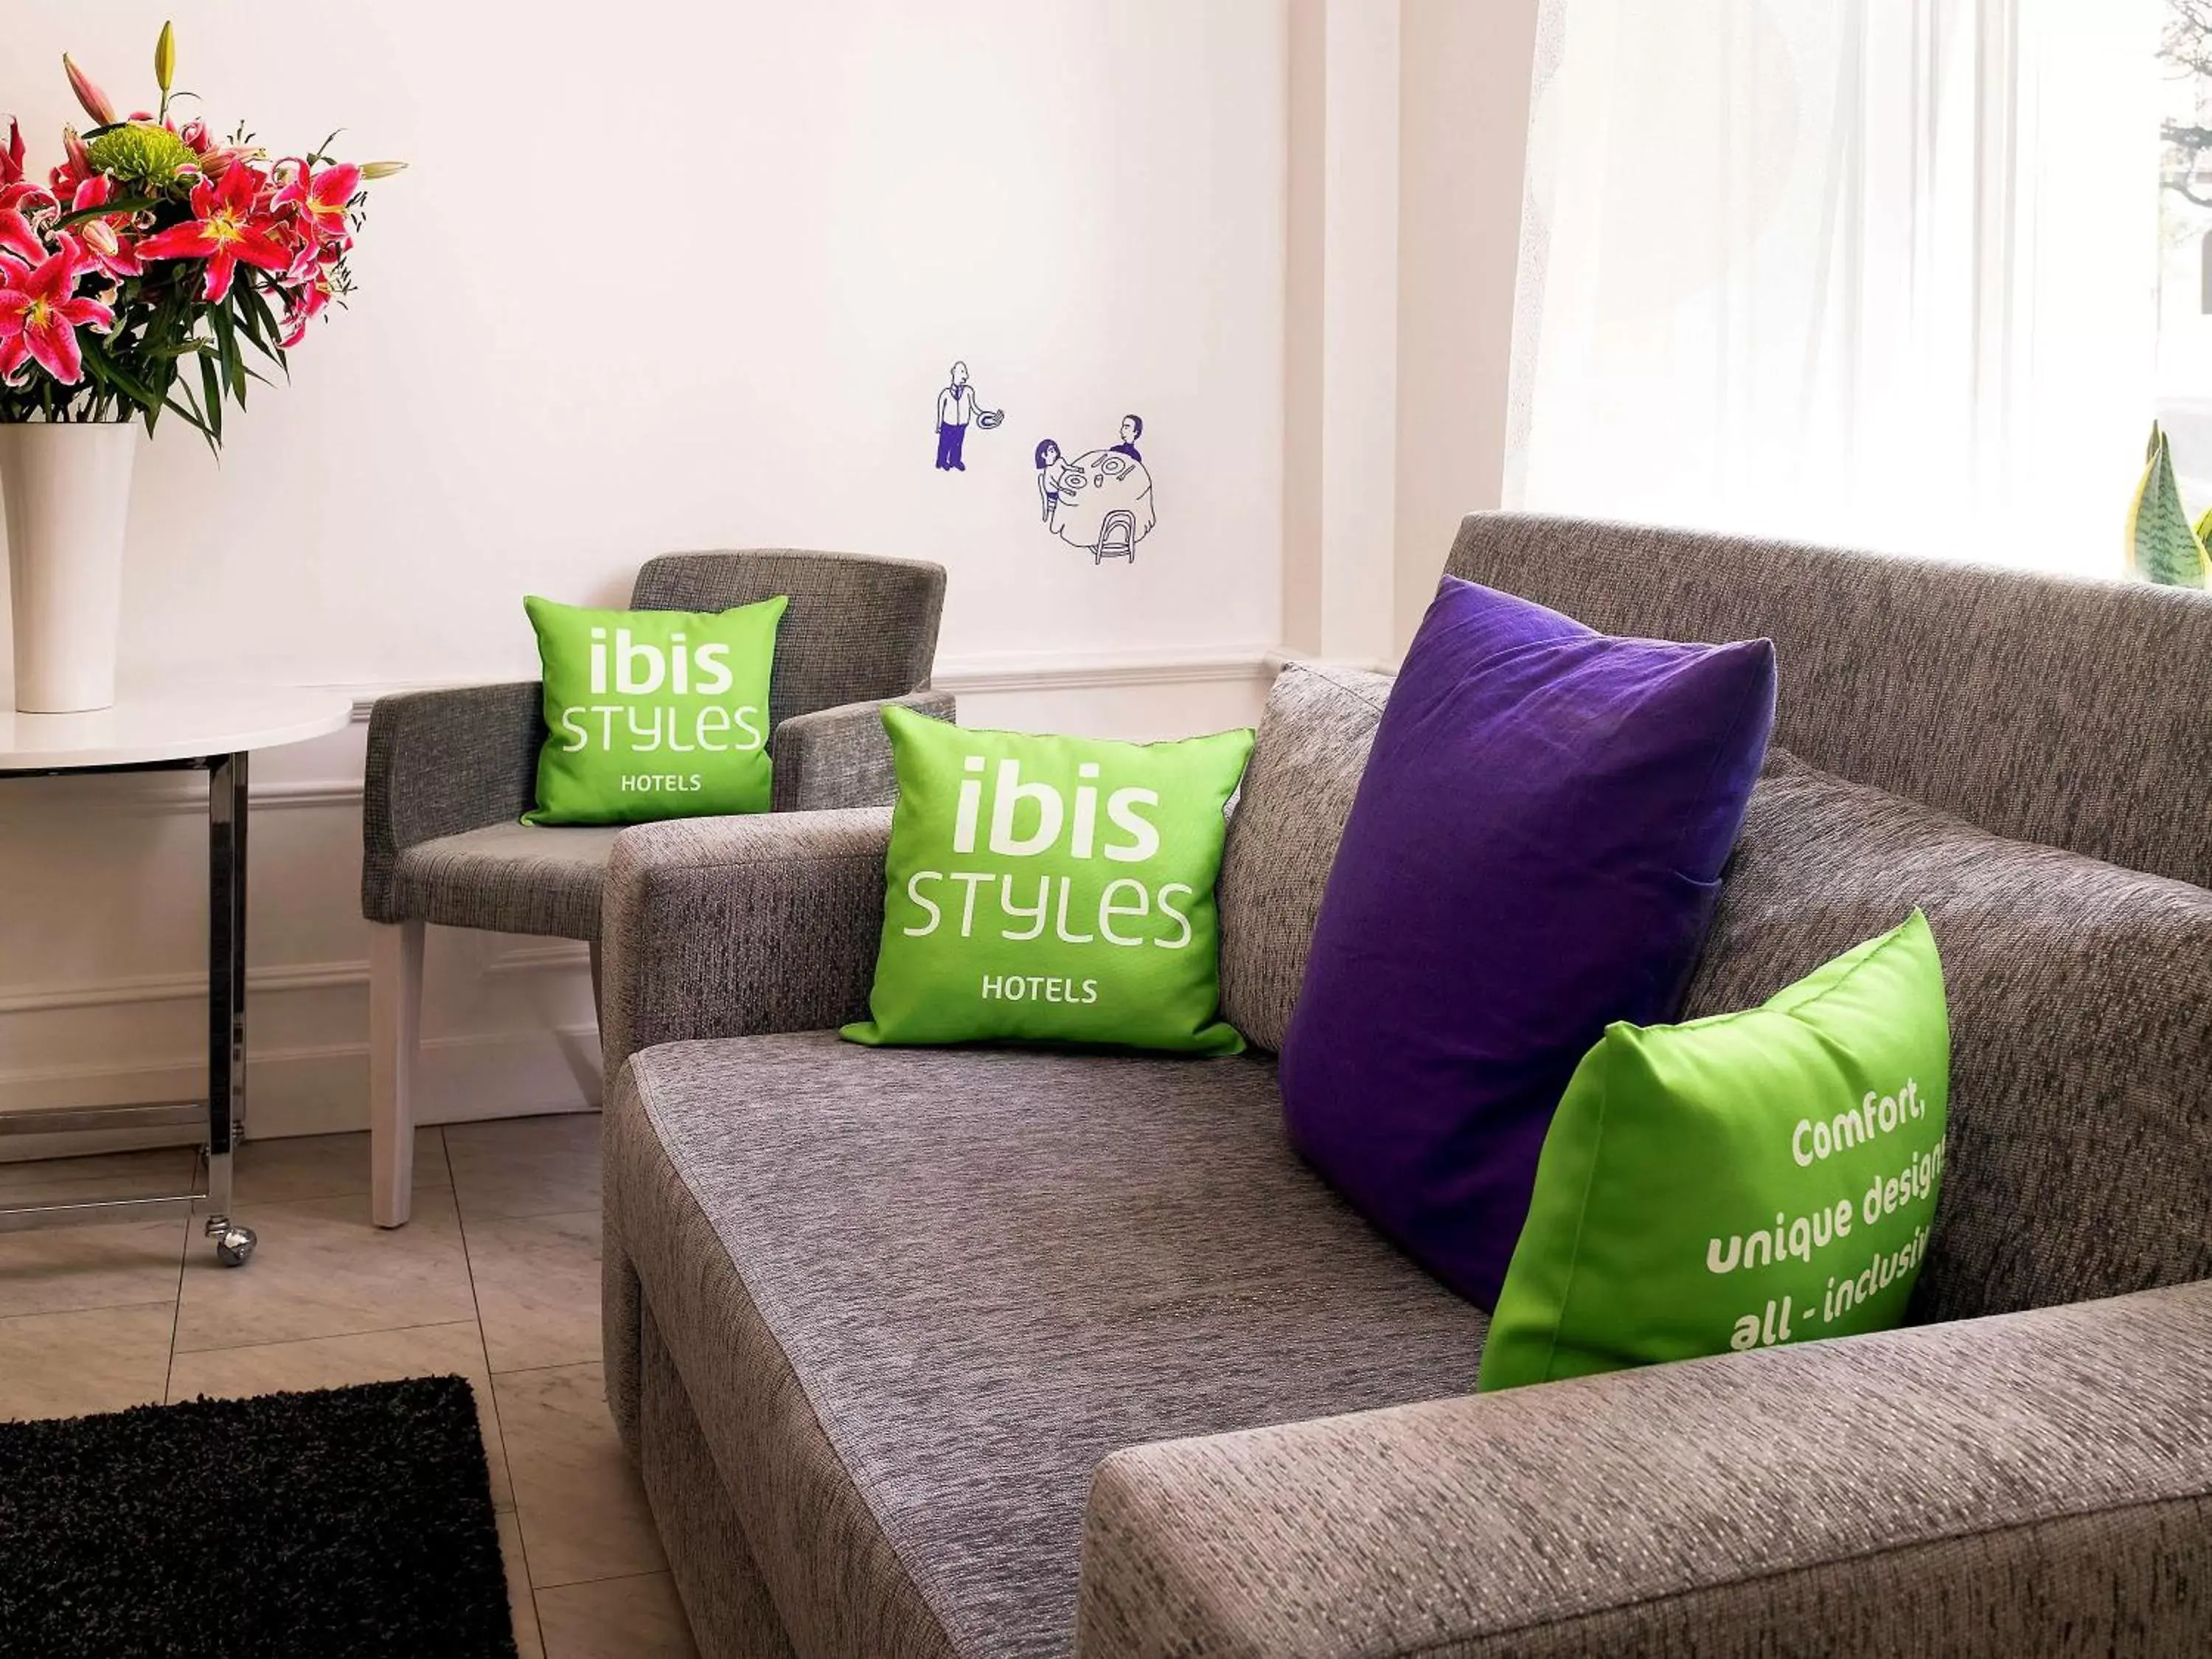 On site, Seating Area in Ibis Styles Stockholm Odenplan